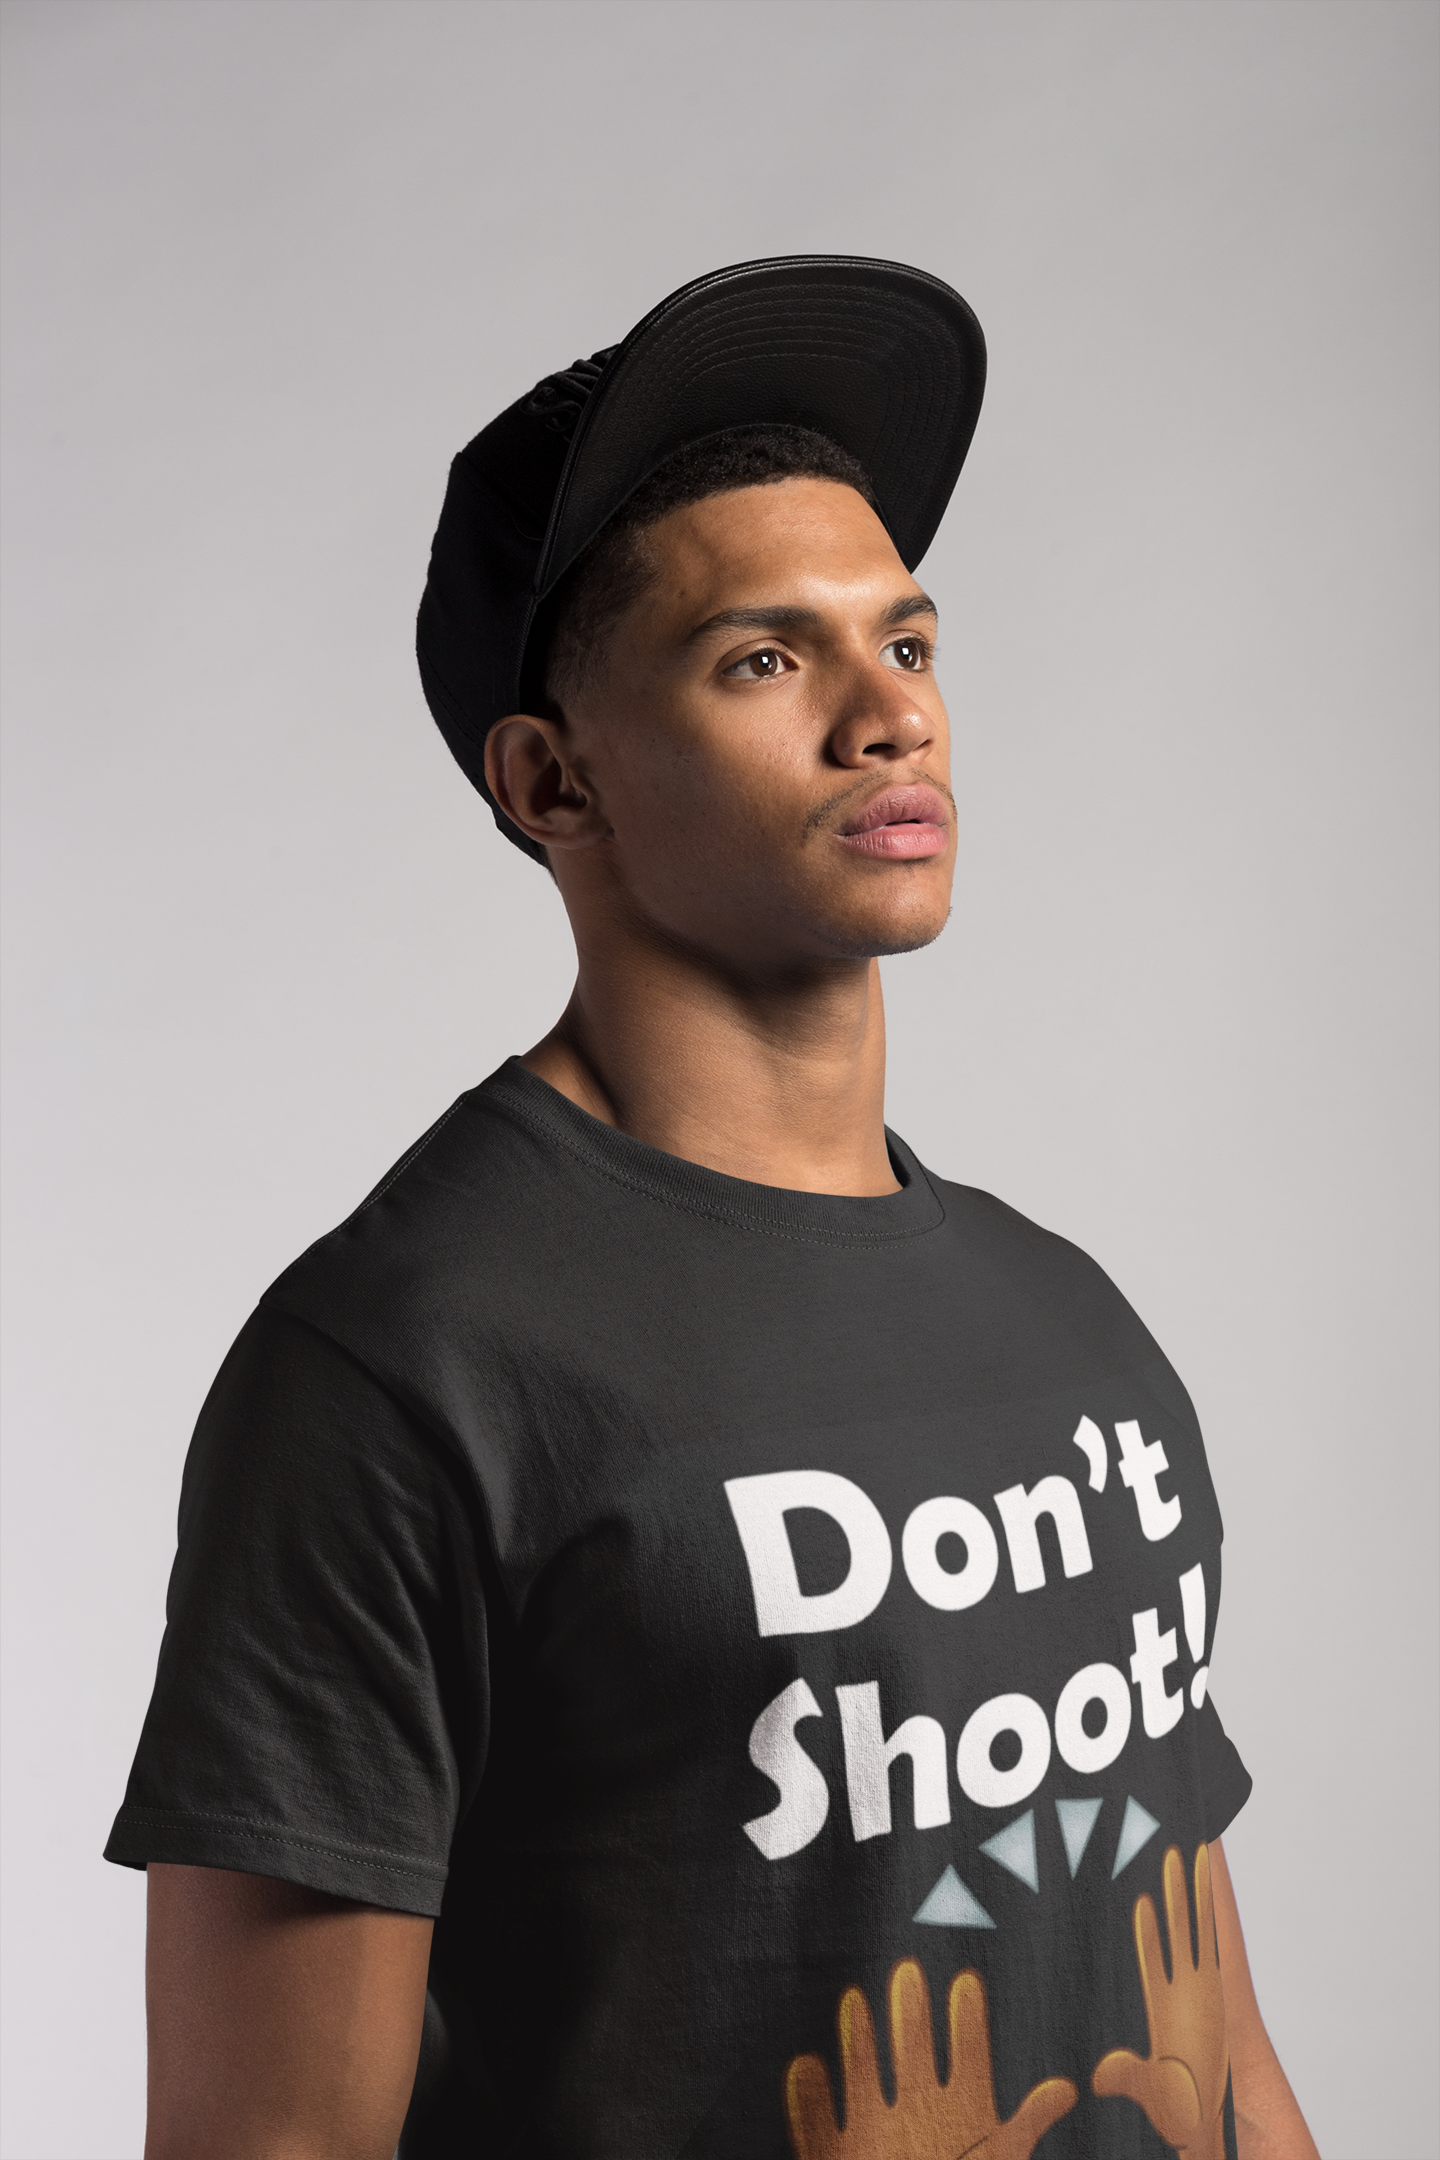 "Don't Shoot" Unisex T-Shirt (Available in Black or Red)